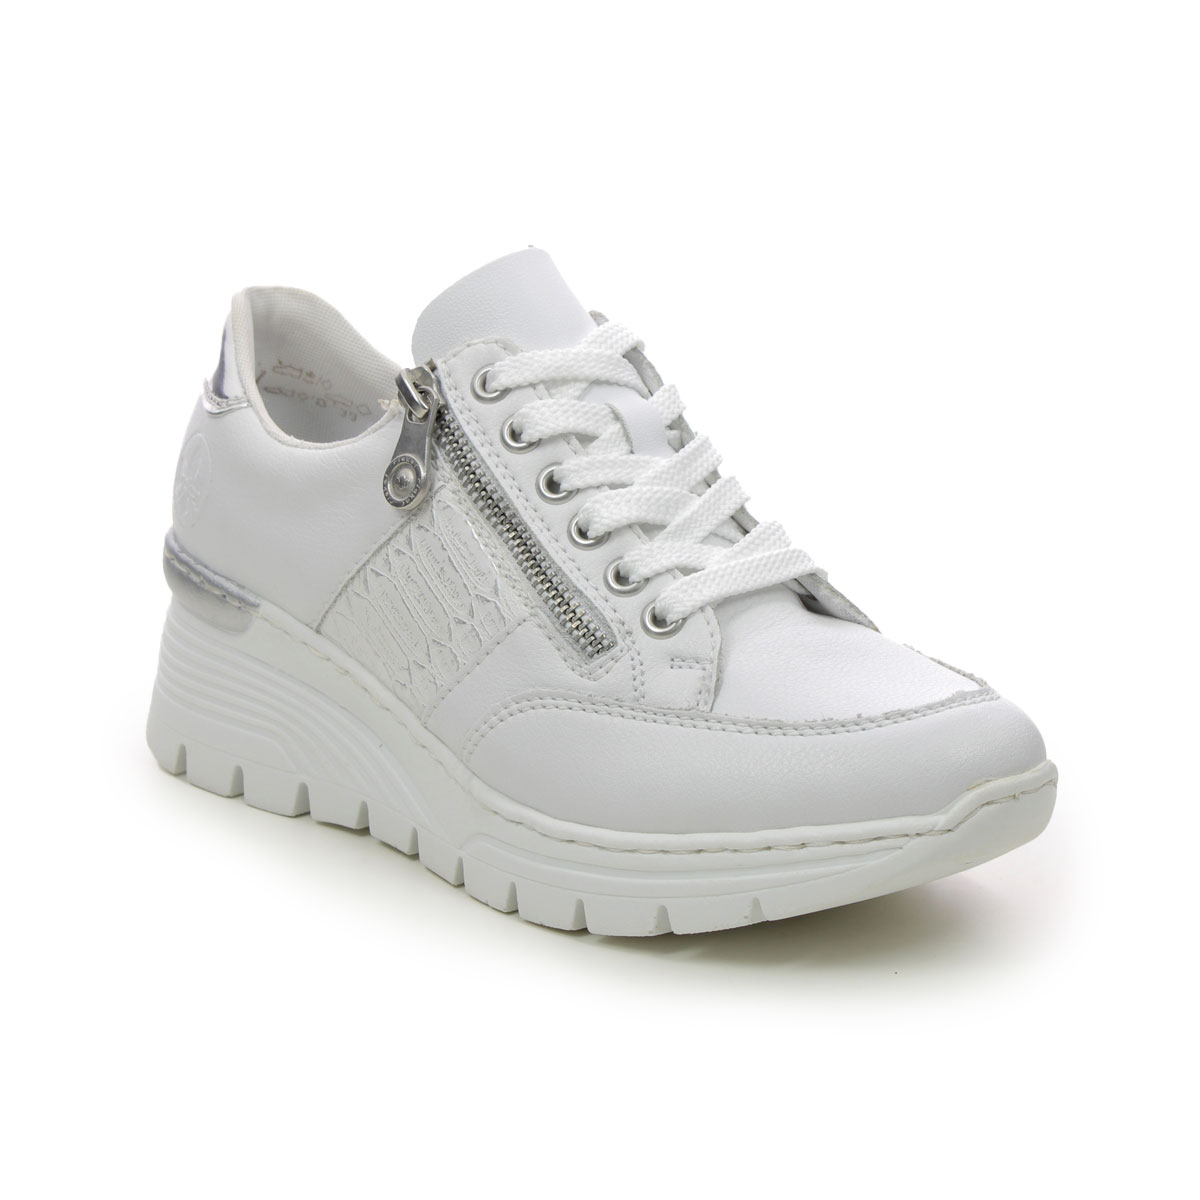 Rieker N8322-80 White Leather Womens trainers in a Plain Leather and Man-made in Size 40